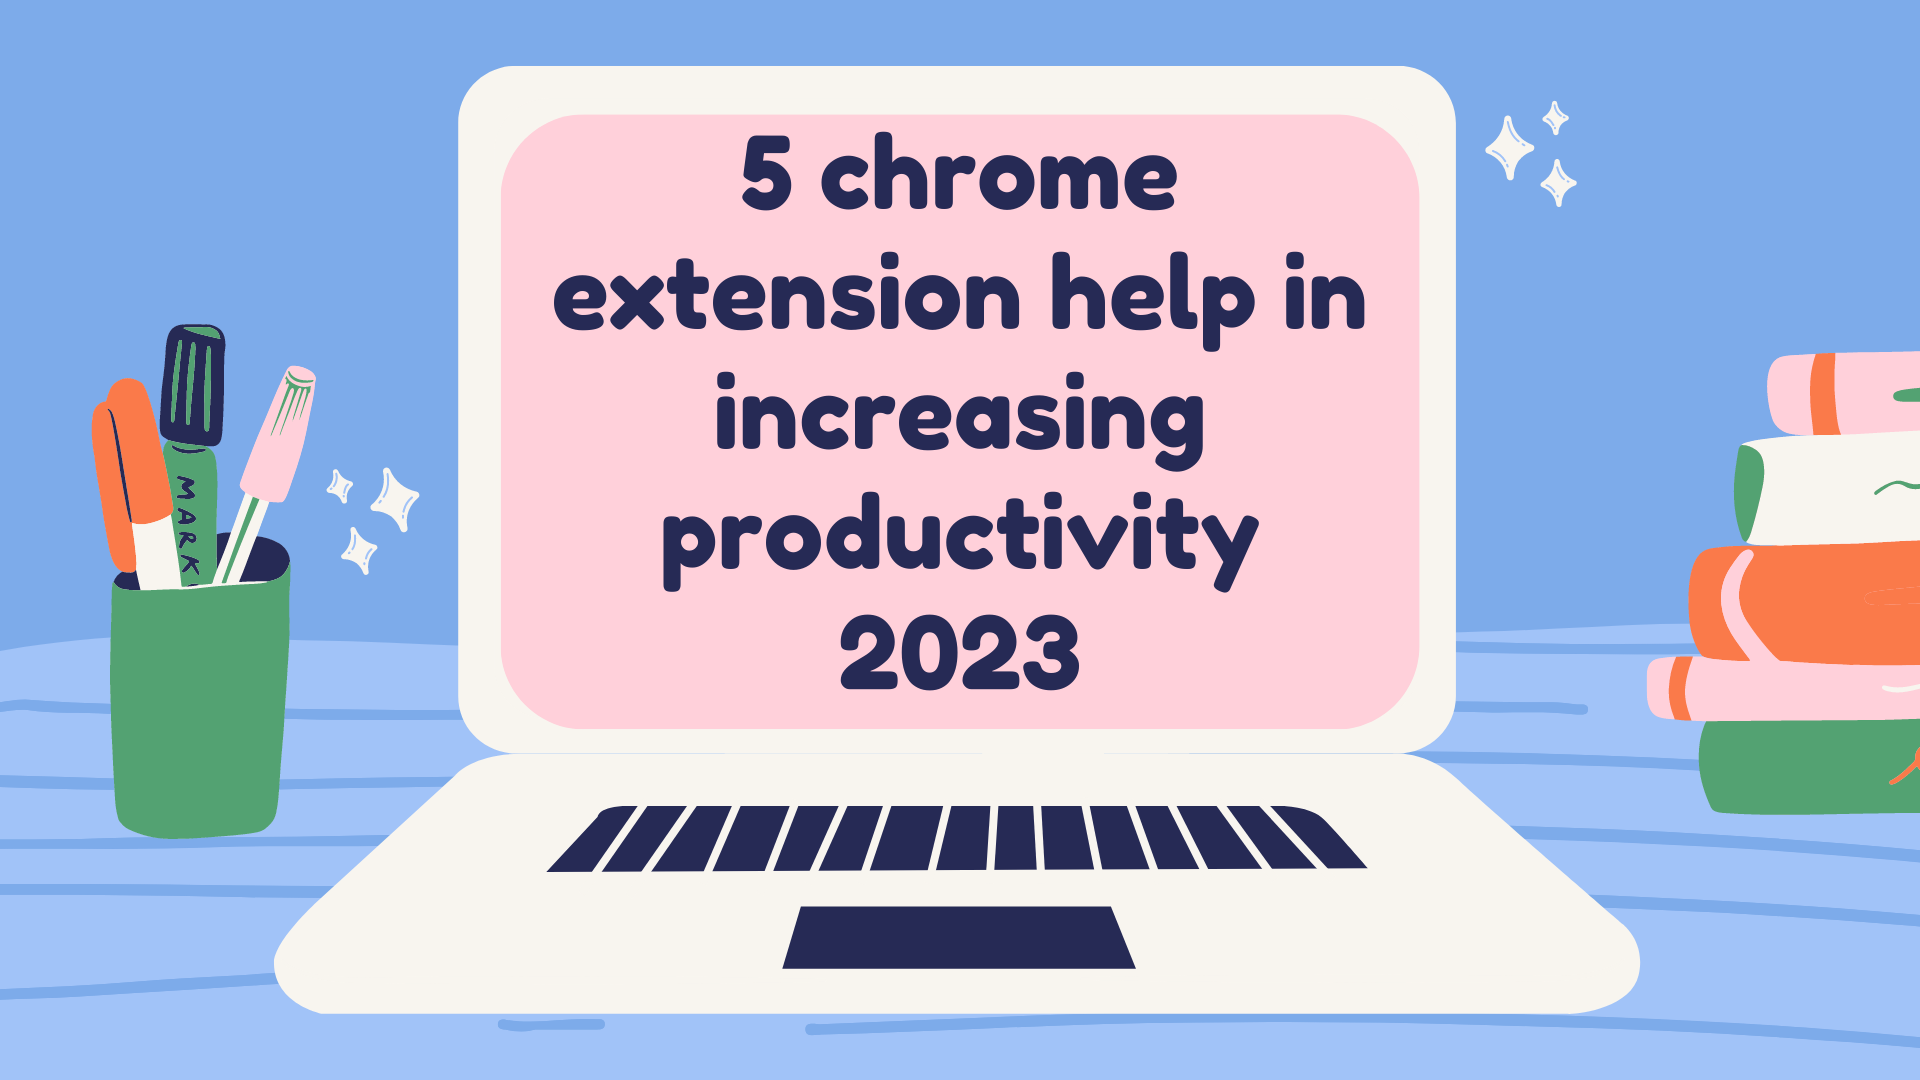 5 chrome extension help in increasing productivity 2023